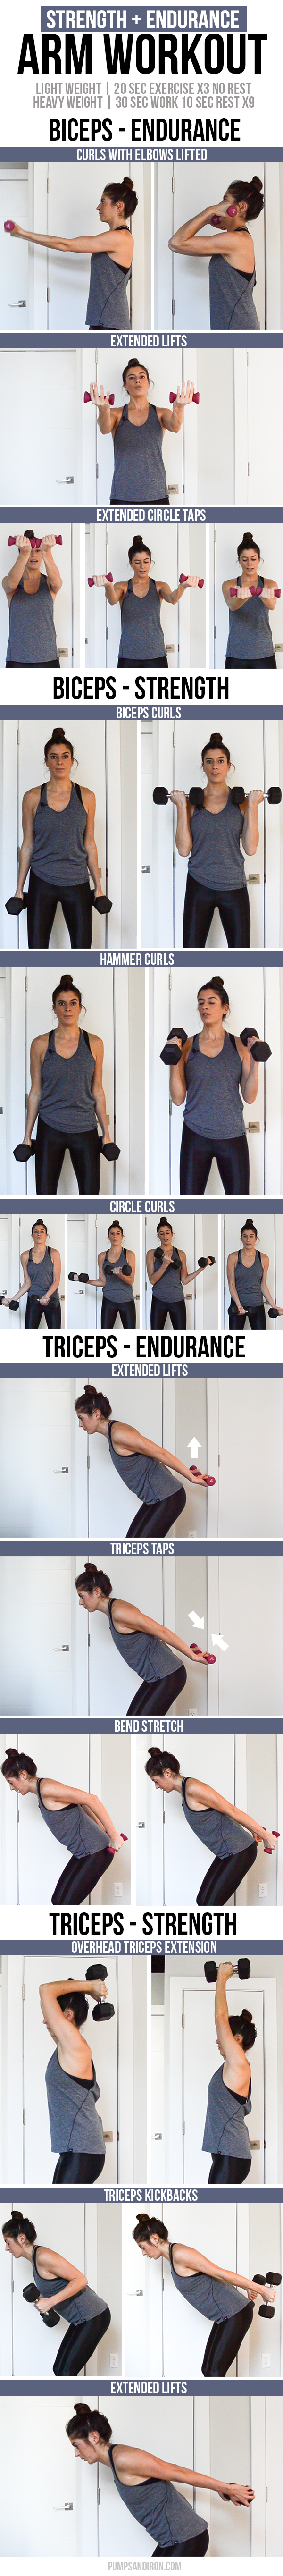 Arm Workout (Biceps + Triceps) - This workout challenges both strength and endurance by using light weights with high reps for a burn-out and following that up with heavier dumbbell exercises